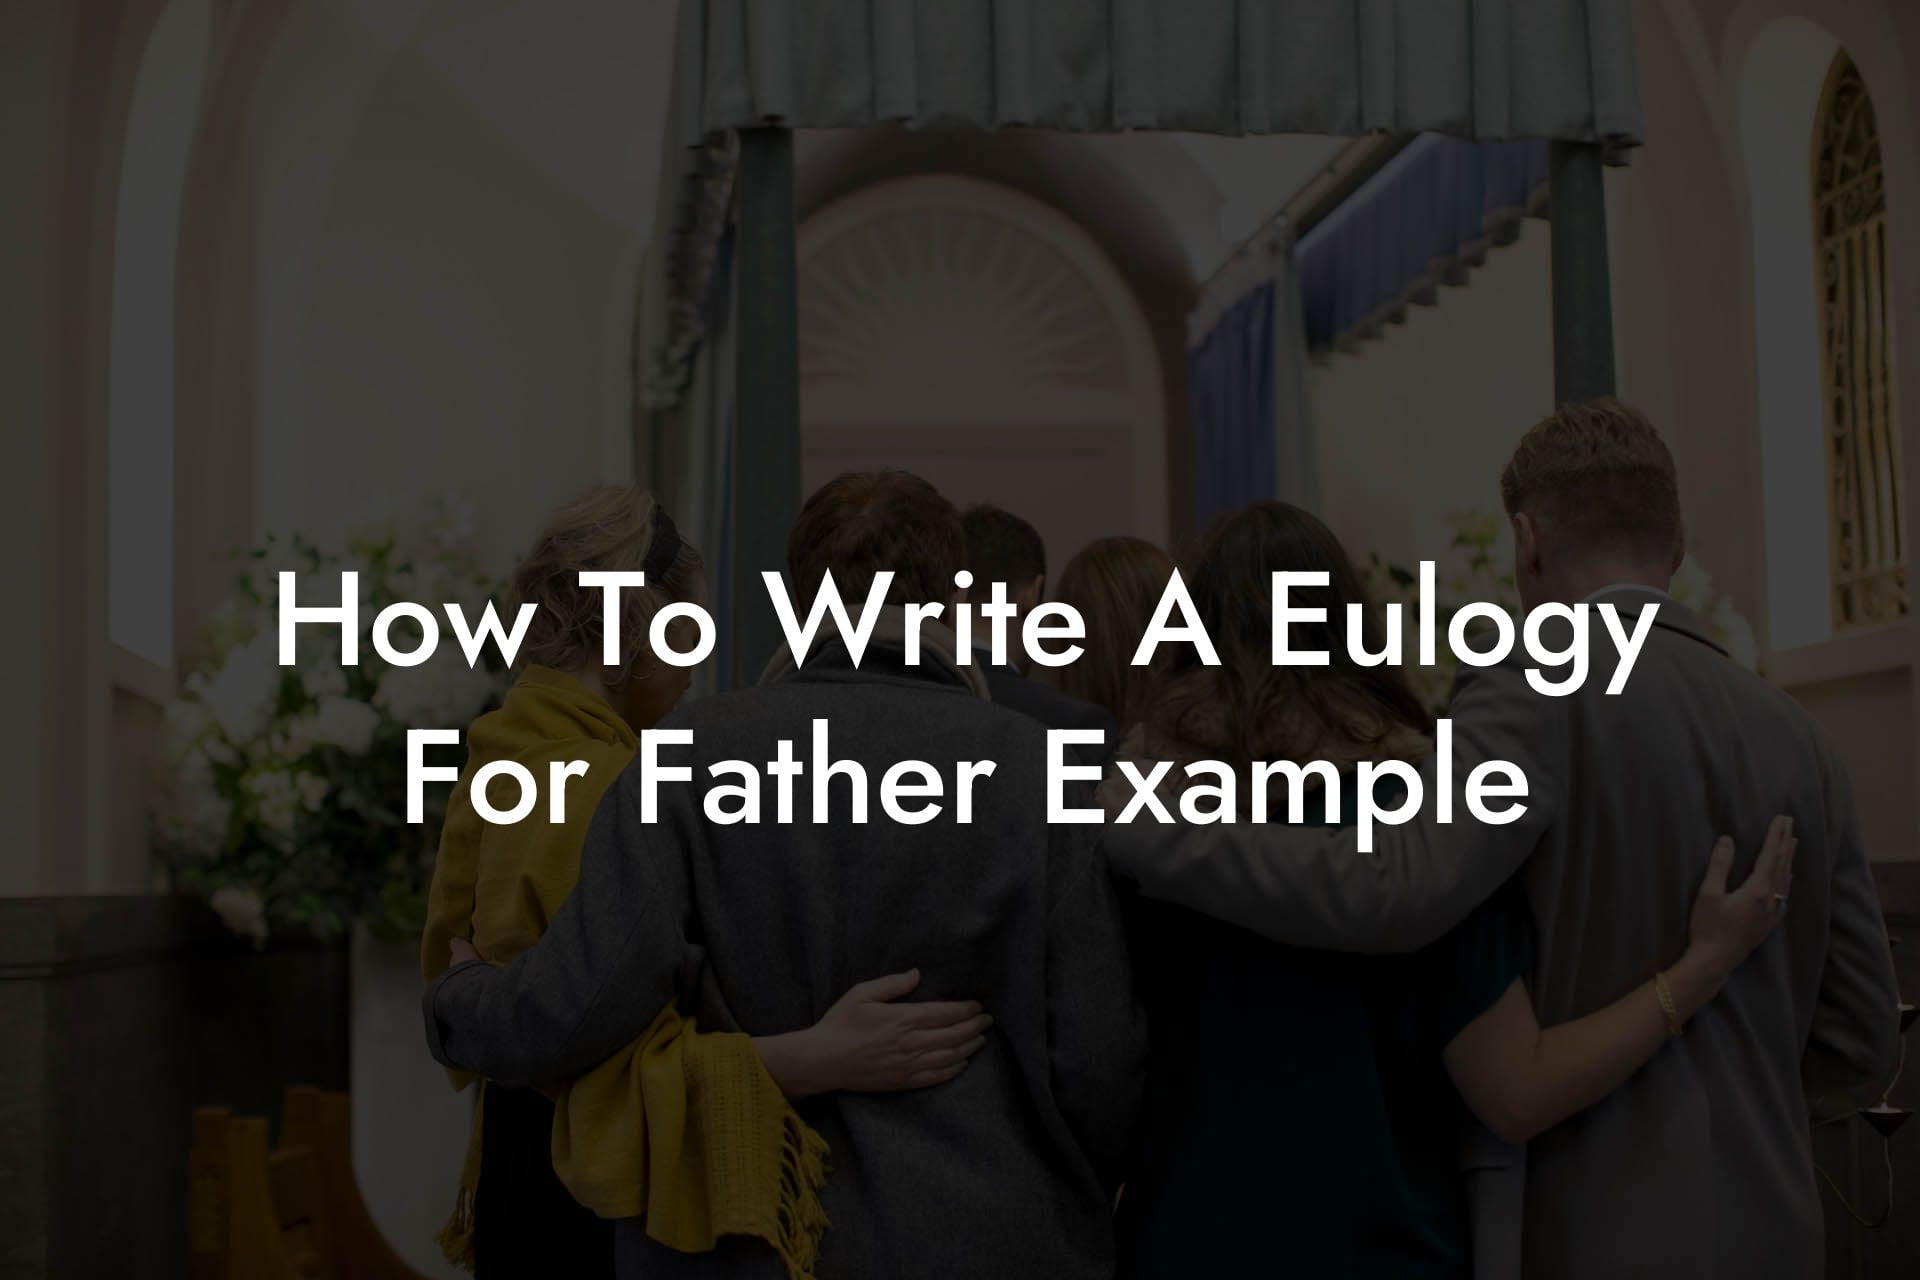 How To Write A Eulogy For Father Example